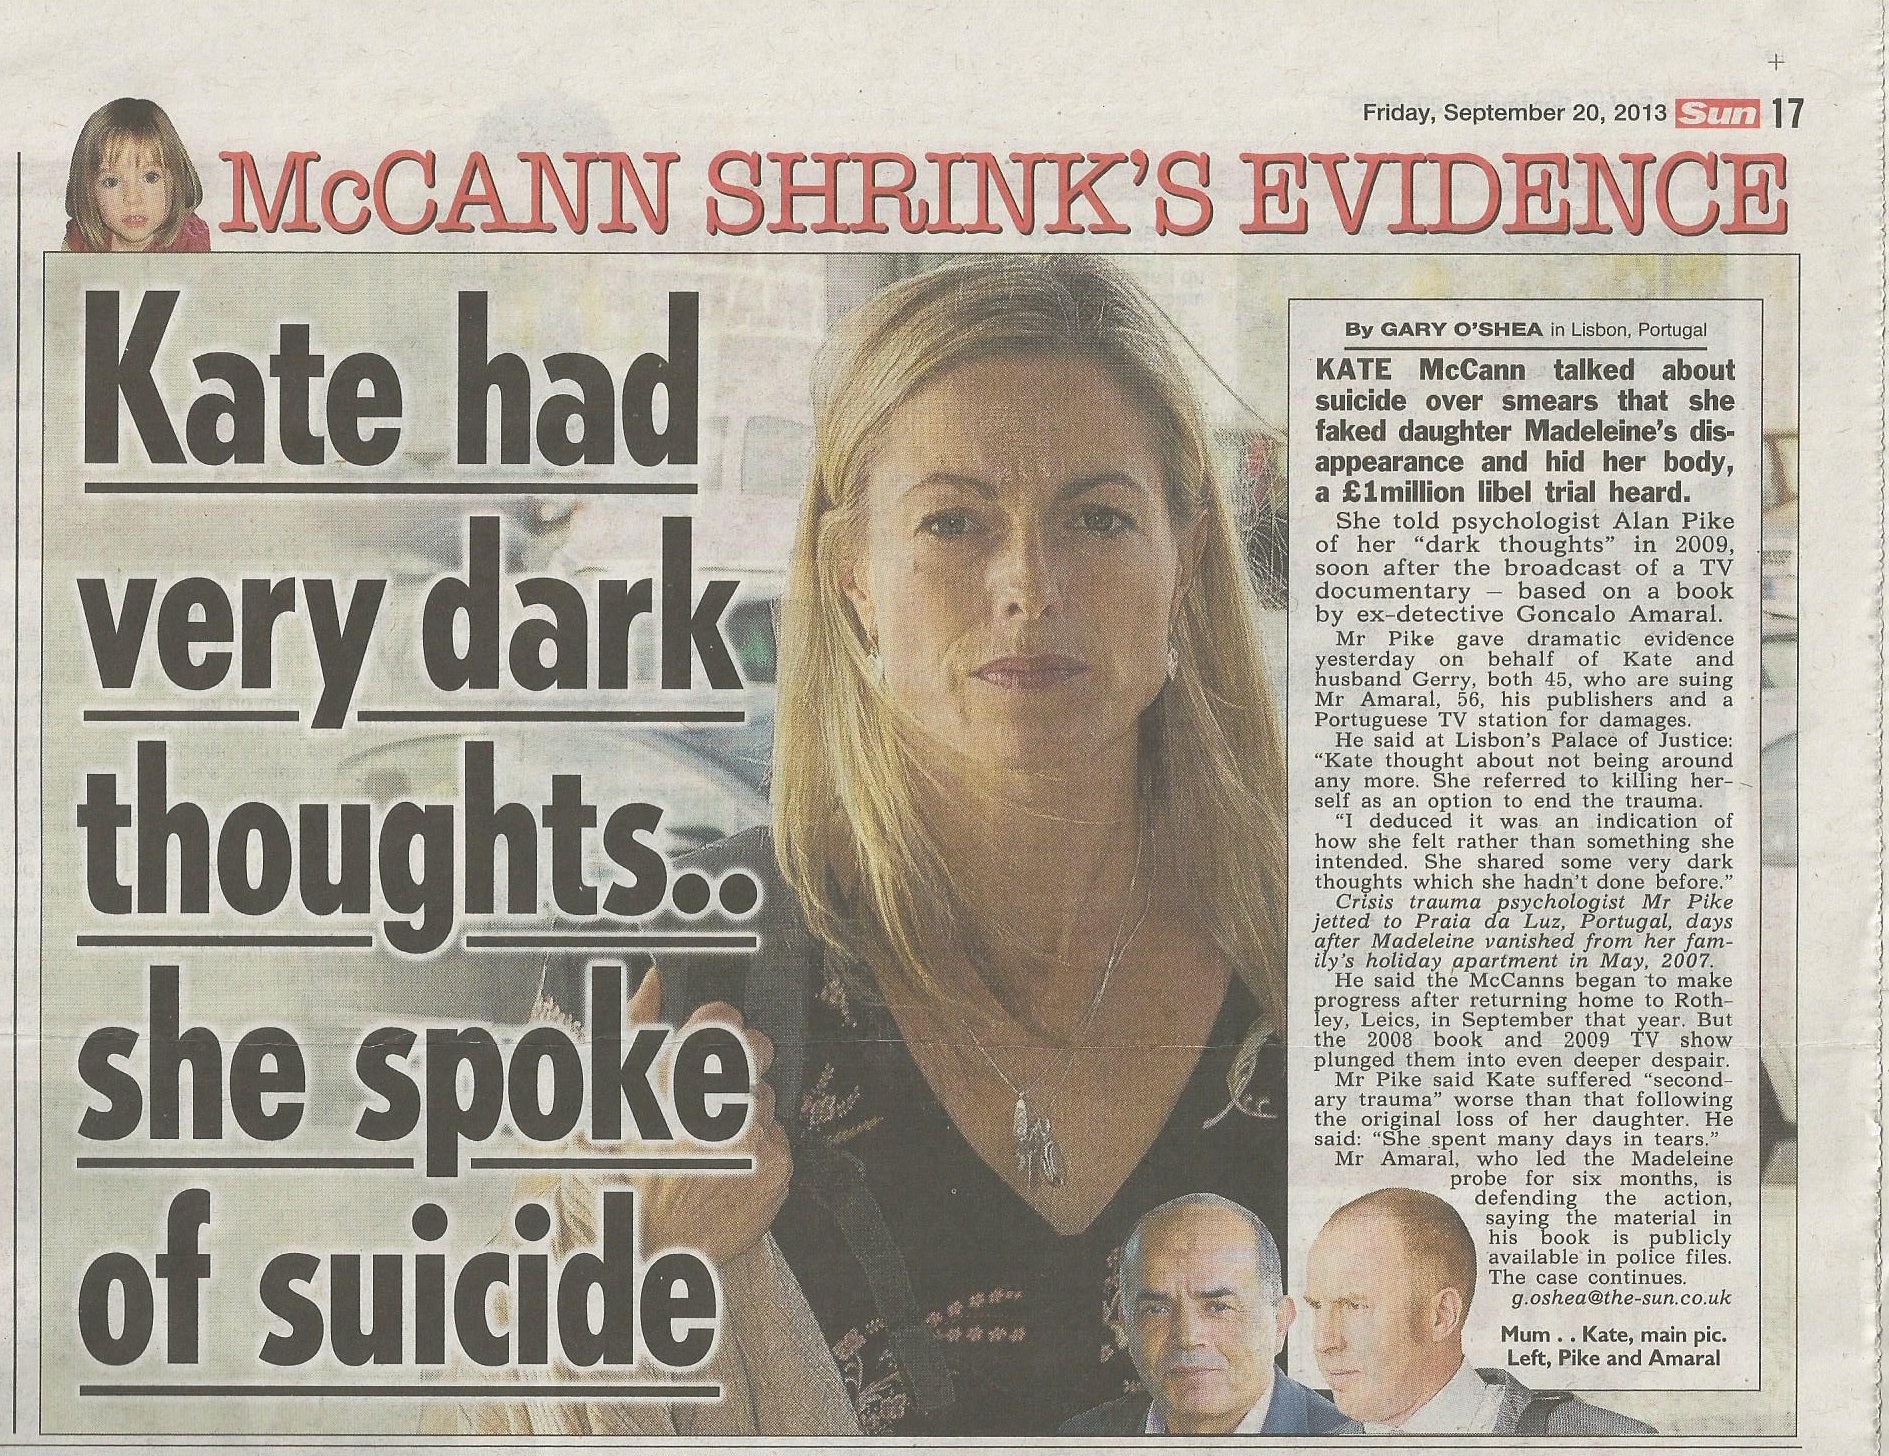 Kate had very dark thoughts..she spoke of suicide - The Sun, paper edition, 20 September 2013